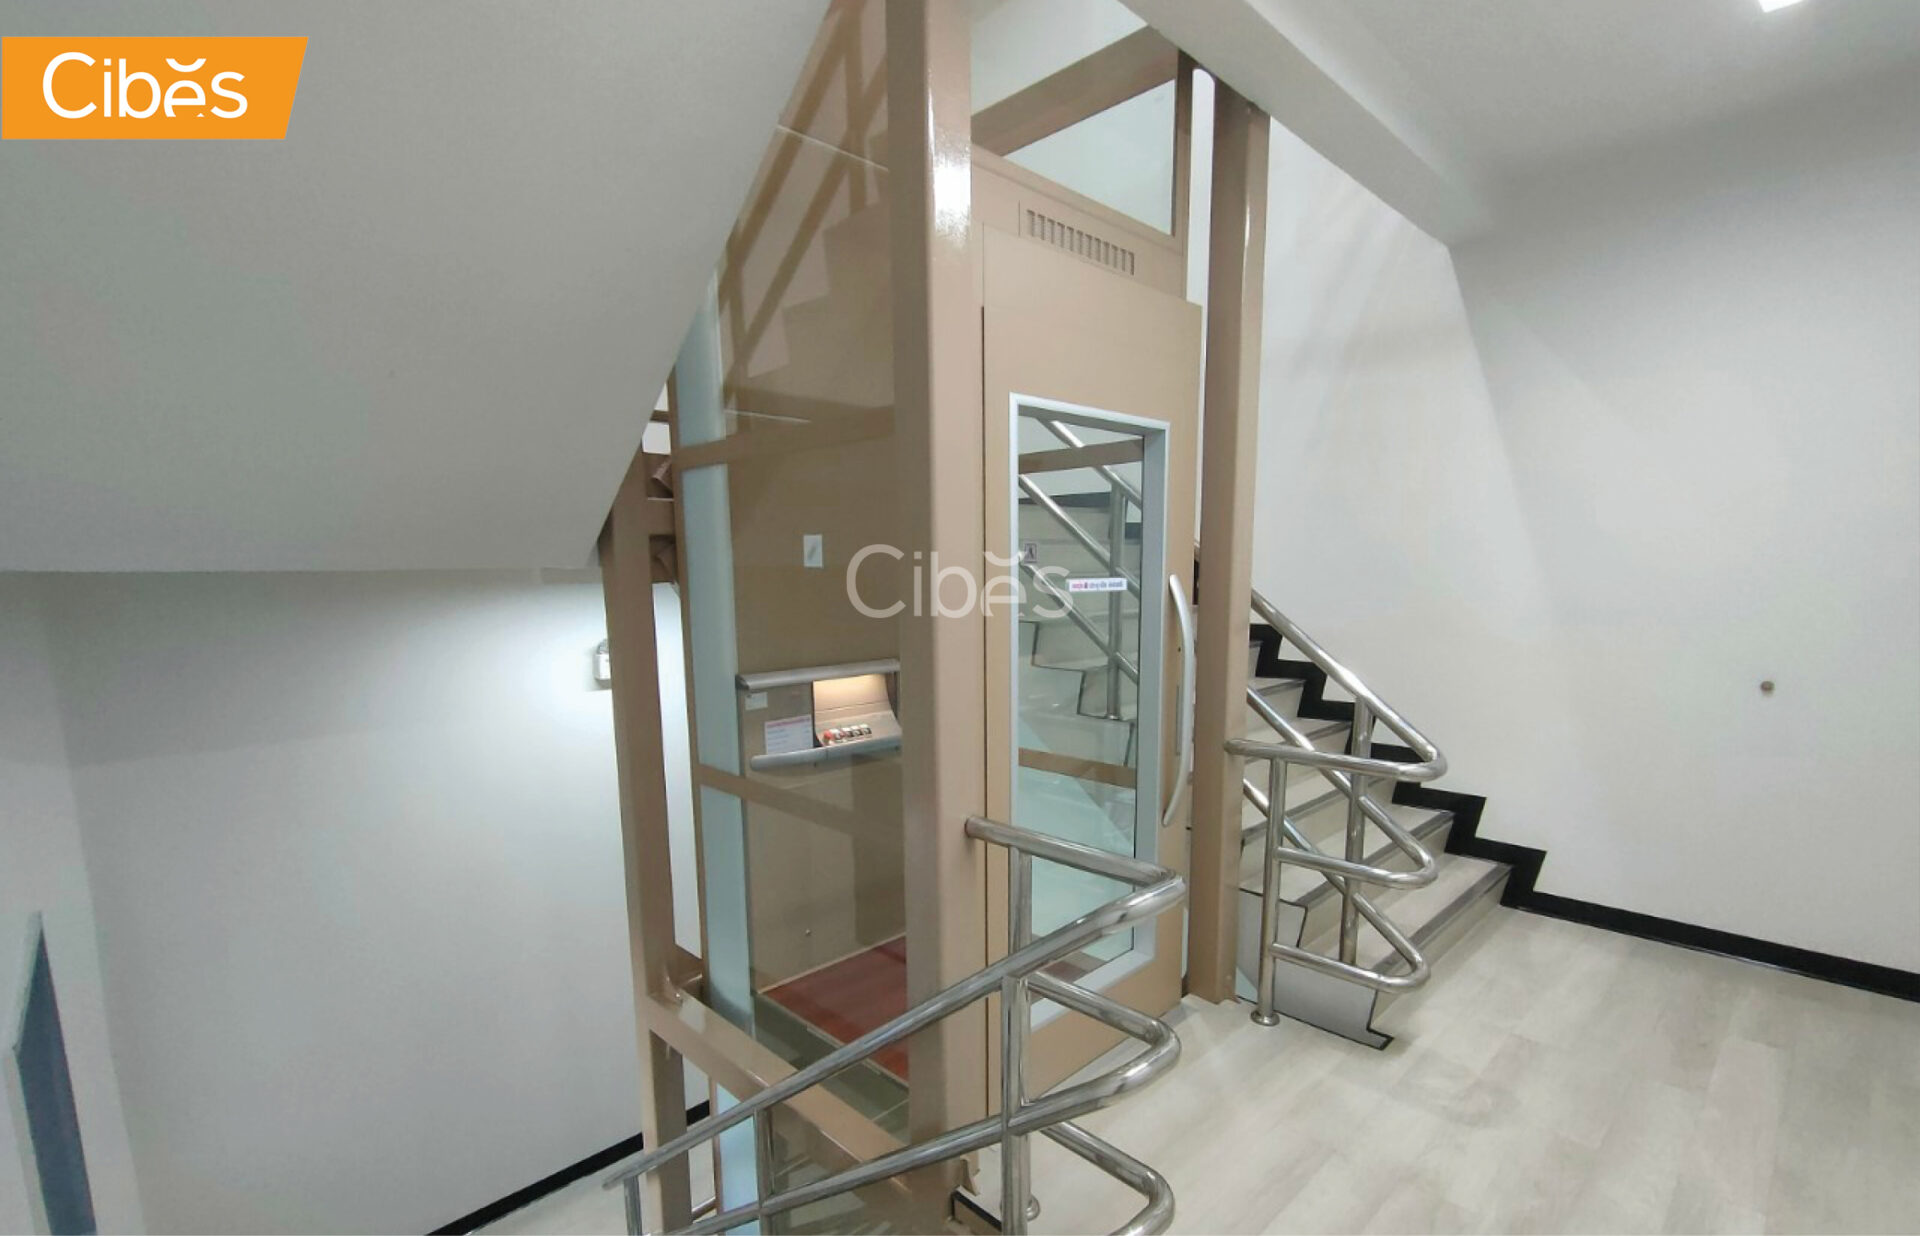 HOME LIFTS – Middle of stairs clas6